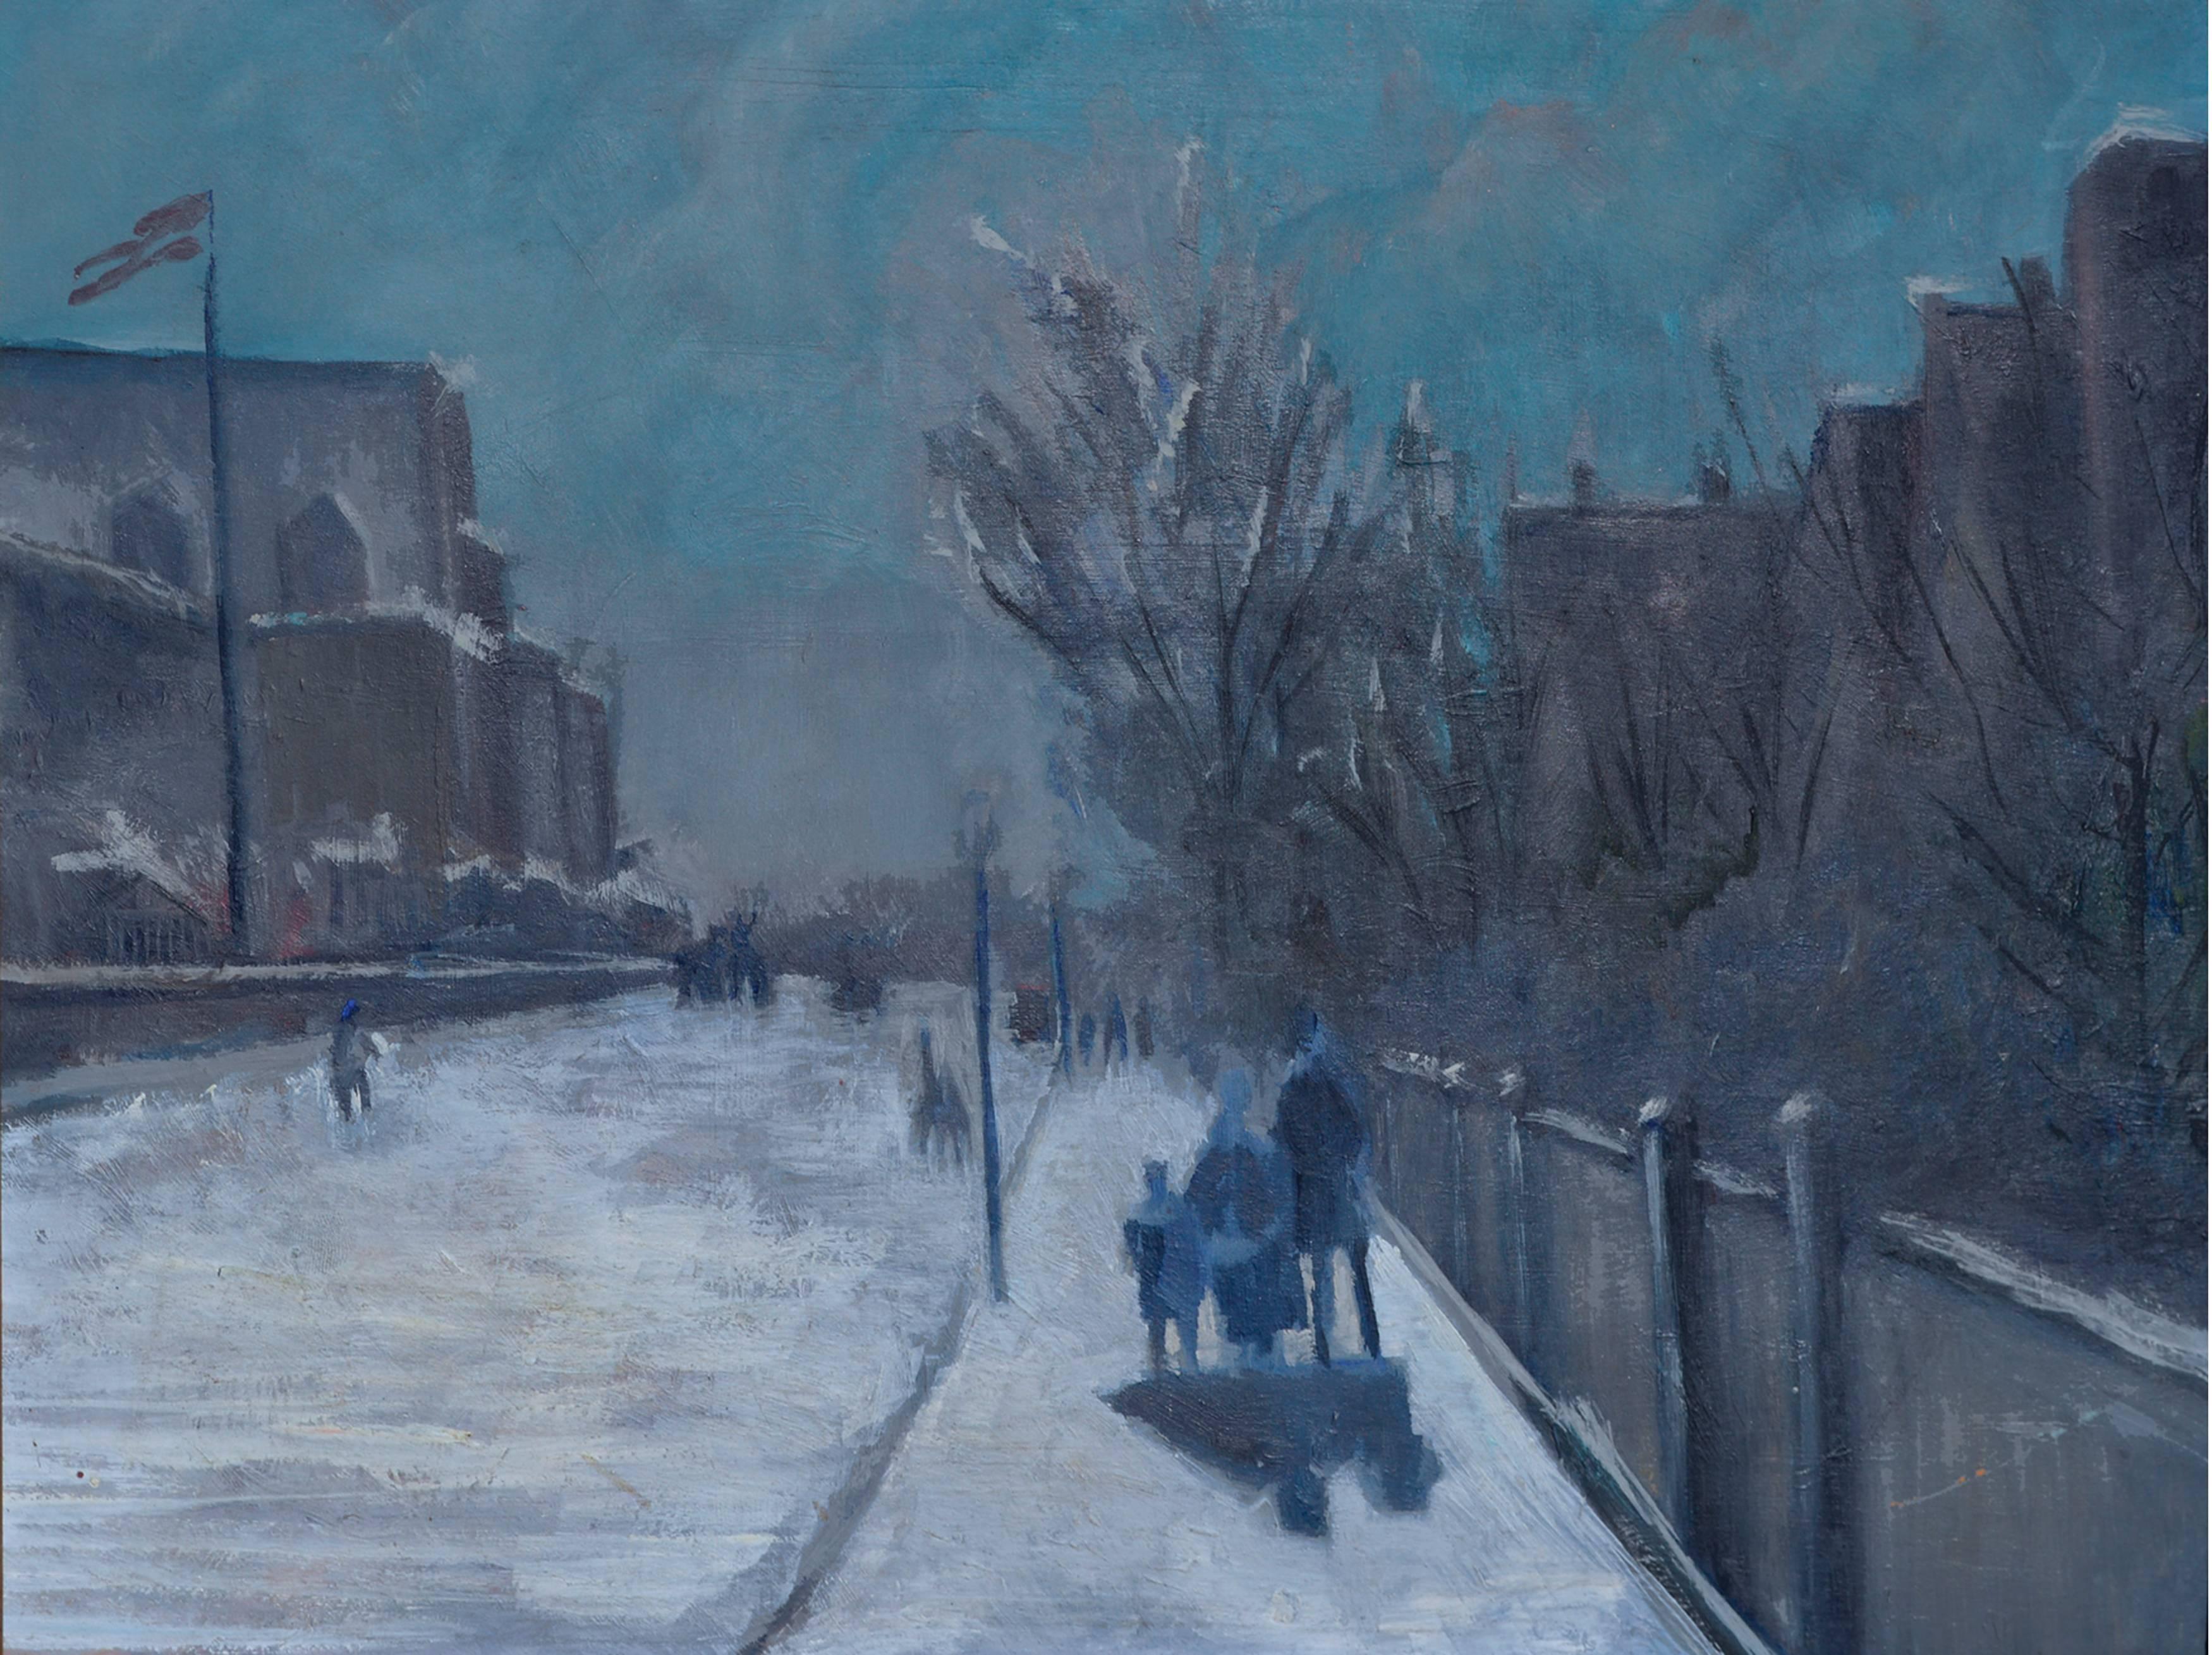 1940's Snowy Night in Algiers - Painting by Unknown